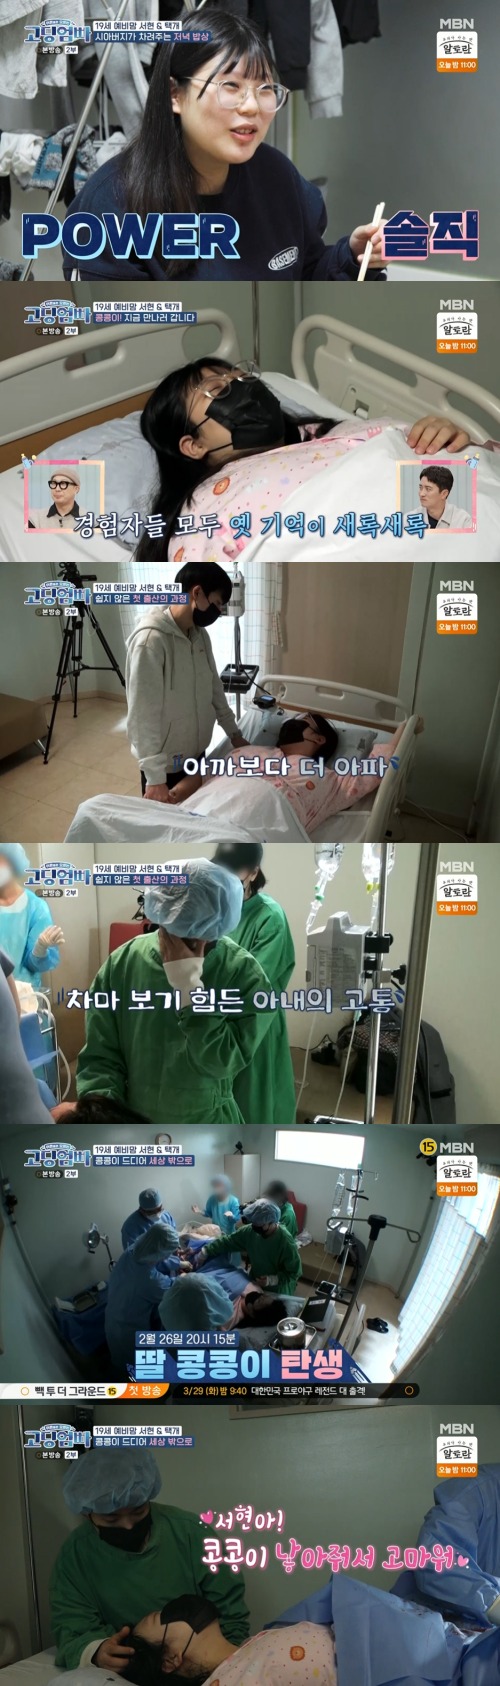 Seoul = = high school mom dad Seohyun & Taek-ga held her pretty daughter in her arms.On MBNs High school mom dad (hereinafter referred to as High school mom dad), which was broadcast on the 27th, the Child Birth process of the Seohyun courier couple was revealed.Someone visited the house of the Seohyun Tuckdog; the father of the Baro Tuckdog, the father-in-law of the Seohyun.The father of the Tuck said he would cook for his daughter-in-law, who was about to go in and rest when Seohyun tried to help.I wanted to cook well, and I put the potato broth and spilled it all away. In addition, I made a mistake of putting mustard sauce into the potato soup.The father of a single cook told me to set up a prize, but the house was not wounded, so I was shocked to see him eating on the floor.It turned out that my father had bought it when he came. After that, Seohyun, who had eaten his own dishes, said frankly, The tomatoes are warm, so it does not fit with me.Park Mi-sun admired the candid way of speaking, saying, Friends are different for the day.My father-in-law was worried that Seohyun was eating well, saying that he ate ramen in the morning and said, If you want to eat, tell your dad.His father-in-laws gift was not the end of the day, but he gave him a red underwear, a baby bracelet, and an allowance in a red envelope that symbolized good luck in China.Seohyun opened the envelope in front of his father-in-law and checked it. The envelope had a handwritten letter from his father-in-law.I felt like you were taking care of it and caring, it was more touching because it was the first time I got it, said Seohyun.A few days later, Seohyun exercised to walk for Soonsan, who said, Park Mi-sun is walking because she needs to walk a lot.Park Mi-sun laughed at the word sister; afterward, Seohyun and the coffers packed up and headed to Hospital.The fetus was too fast to deliver induction, but the promotion did not mean that it was a Child Birth on Baro day.In particular, an obstetrician explains that acetic acid takes longer.Time passed, but there was no sign of a Child Birth: The doctor in charge said that if it took too long, surgery should be done.The surgery story was tense with Seohyun and the collapsing dog.In addition, the surgery required a consent form, which they did not report to Marriage, so they needed another guardian of Seohyun.Seohyun wept as if she could not bear the pain. When the pain got worse, she was injected with painless pain.I think I know why Im tearing my Husband head off, joked Seohyun, who was a little better.Thirty-five hours after the injection, Child Birth began; Seohyun successfully delivered the natural delivery; the courier told Seohyun, Thank you for the bean-bean spawning.Haha and Park Mi-sun seemed to have been overwhelmed by the Child Birth process, and then they spoke on video with Seohyun in the postpartum care center, who congratulated them all as if they were their own.I was a little sick when I was a Child girl, but now Im okay, said Seohyun. I did not know Husband would cry, but after I had a baby, I cried while stroking my head.Is postpartum cooking important, but are you doing well? the humanist asked.Im eating three-shisie well because I supported the postpartum care center at high school mom dad, said Seohyun.